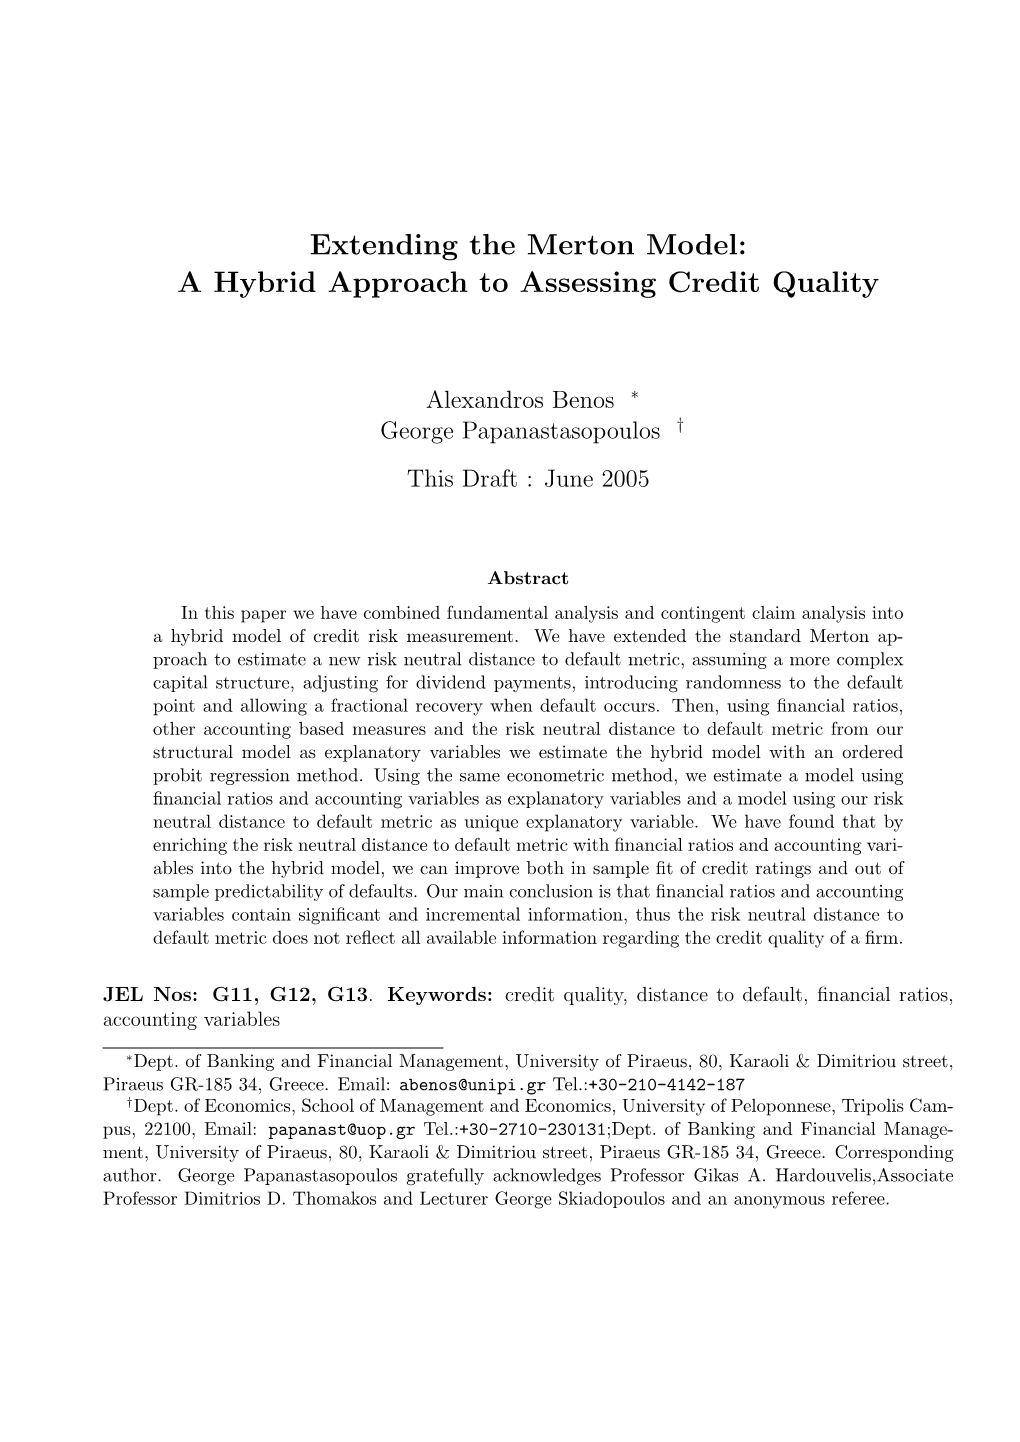 Extending the Merton Model: a Hybrid Approach to Assessing Credit Quality